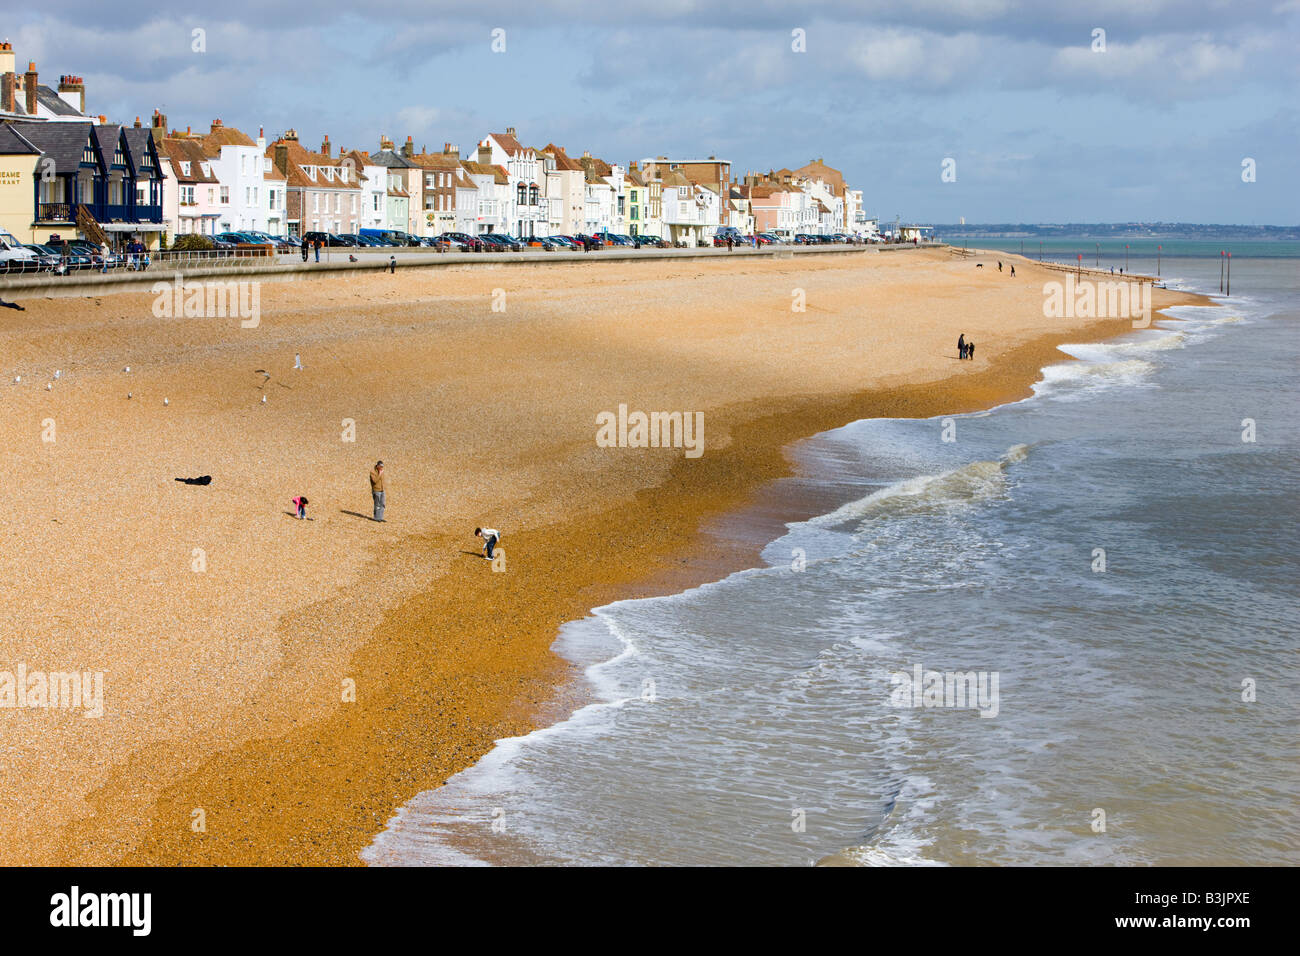 The beach and seafront in Deal Kent Stock Photo